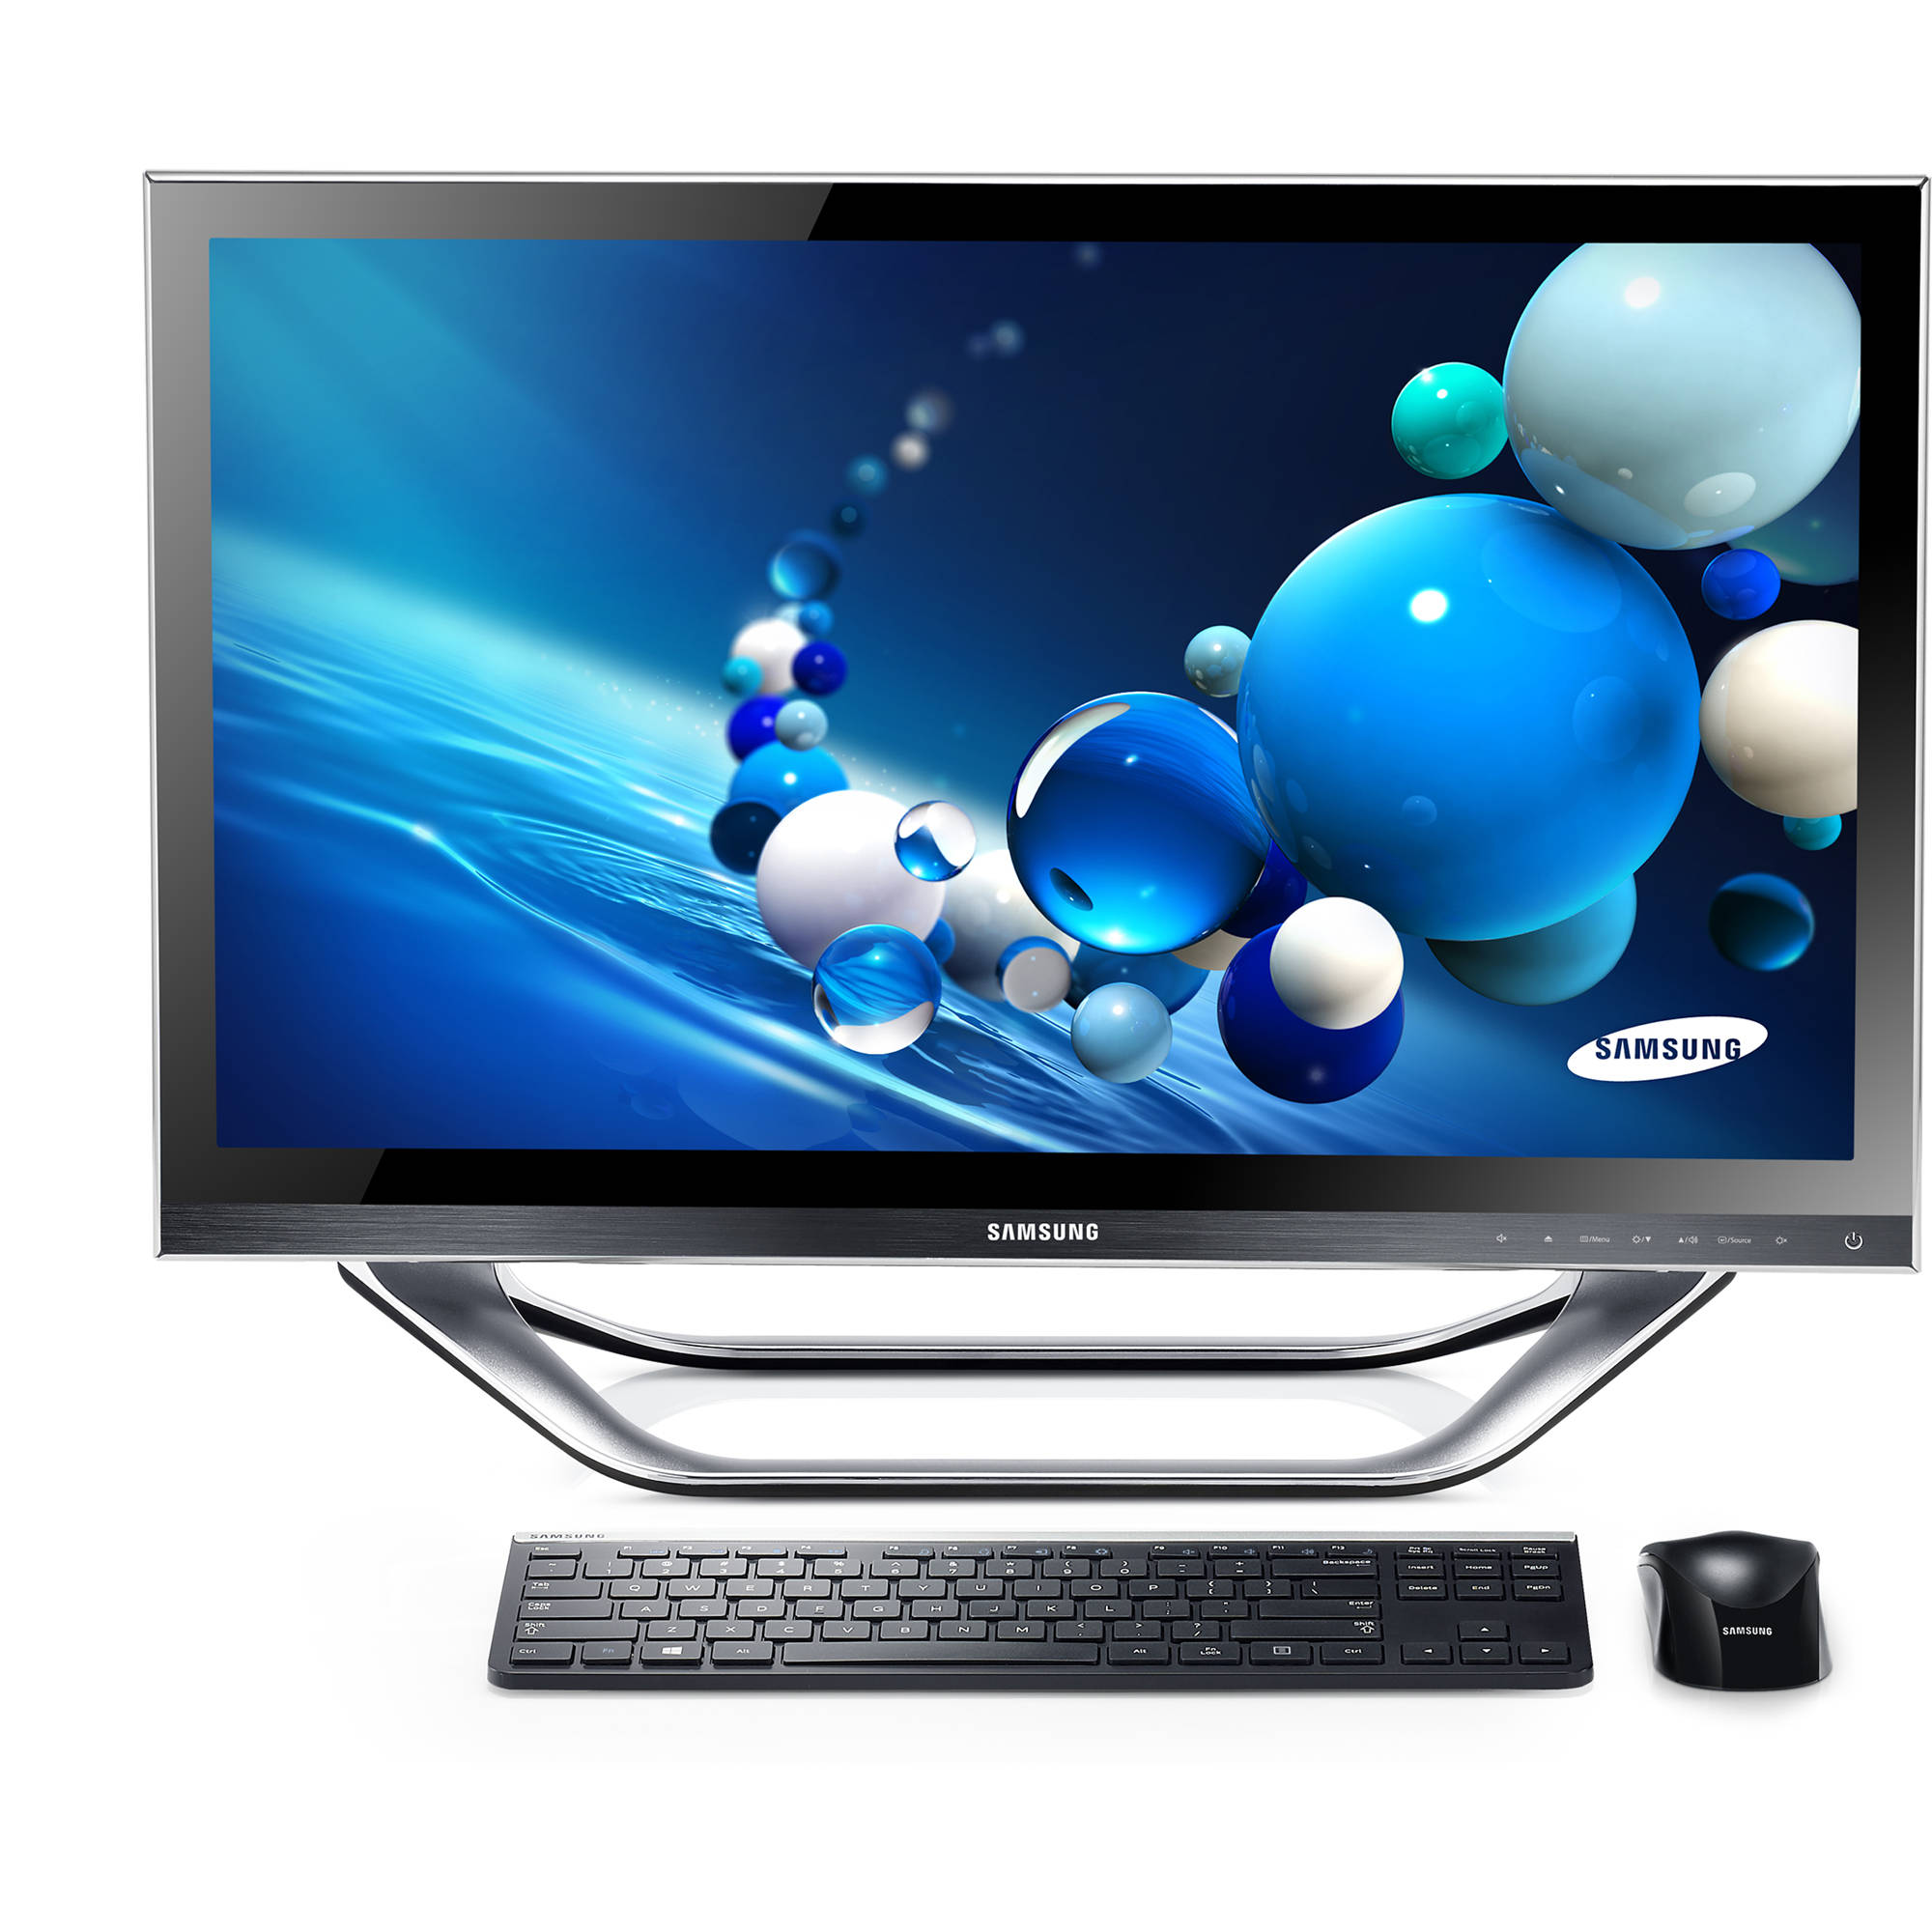 Samsung DP700A7DS01US Series 7 - 27-Inch All-in-one Touchscreen Desktop - Samsung Parts USA